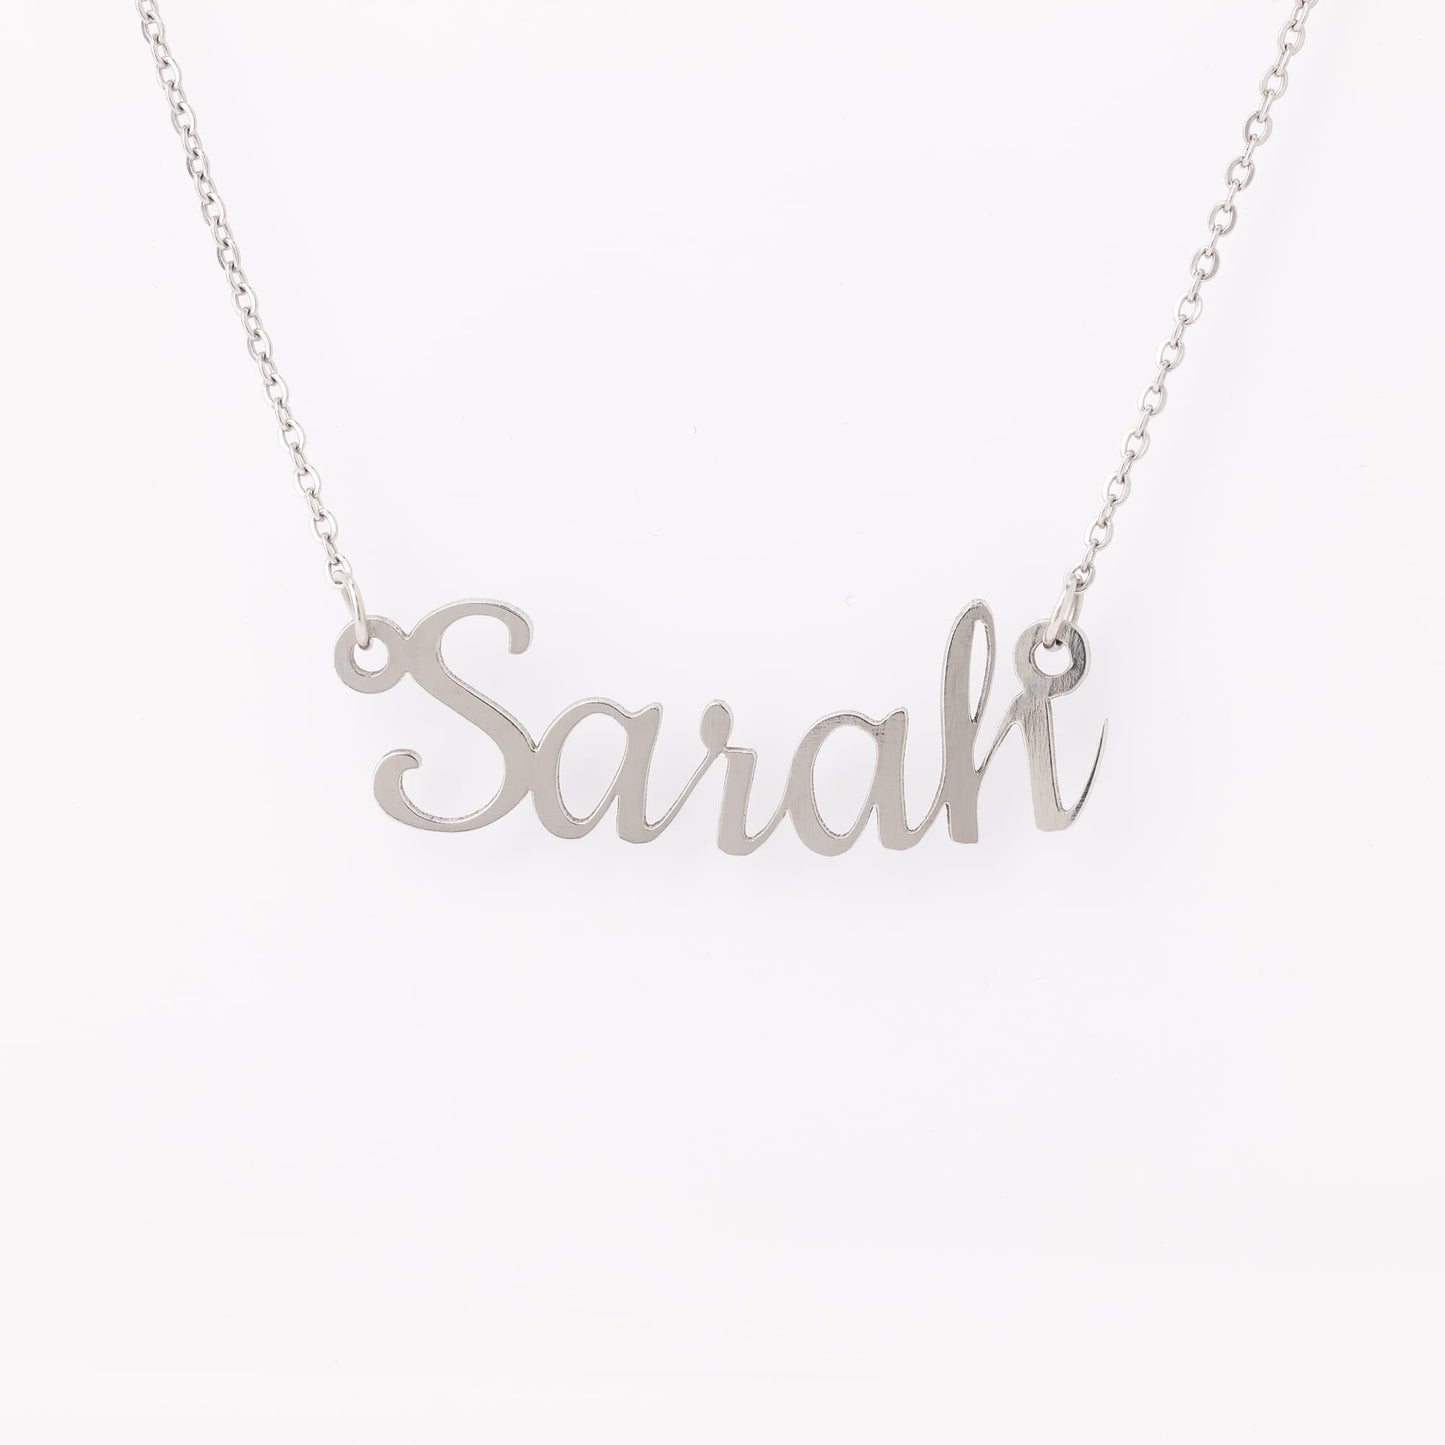 Personalized Name Necklace - Made in the USA using American Steel. - Broken Knuckle Apparel